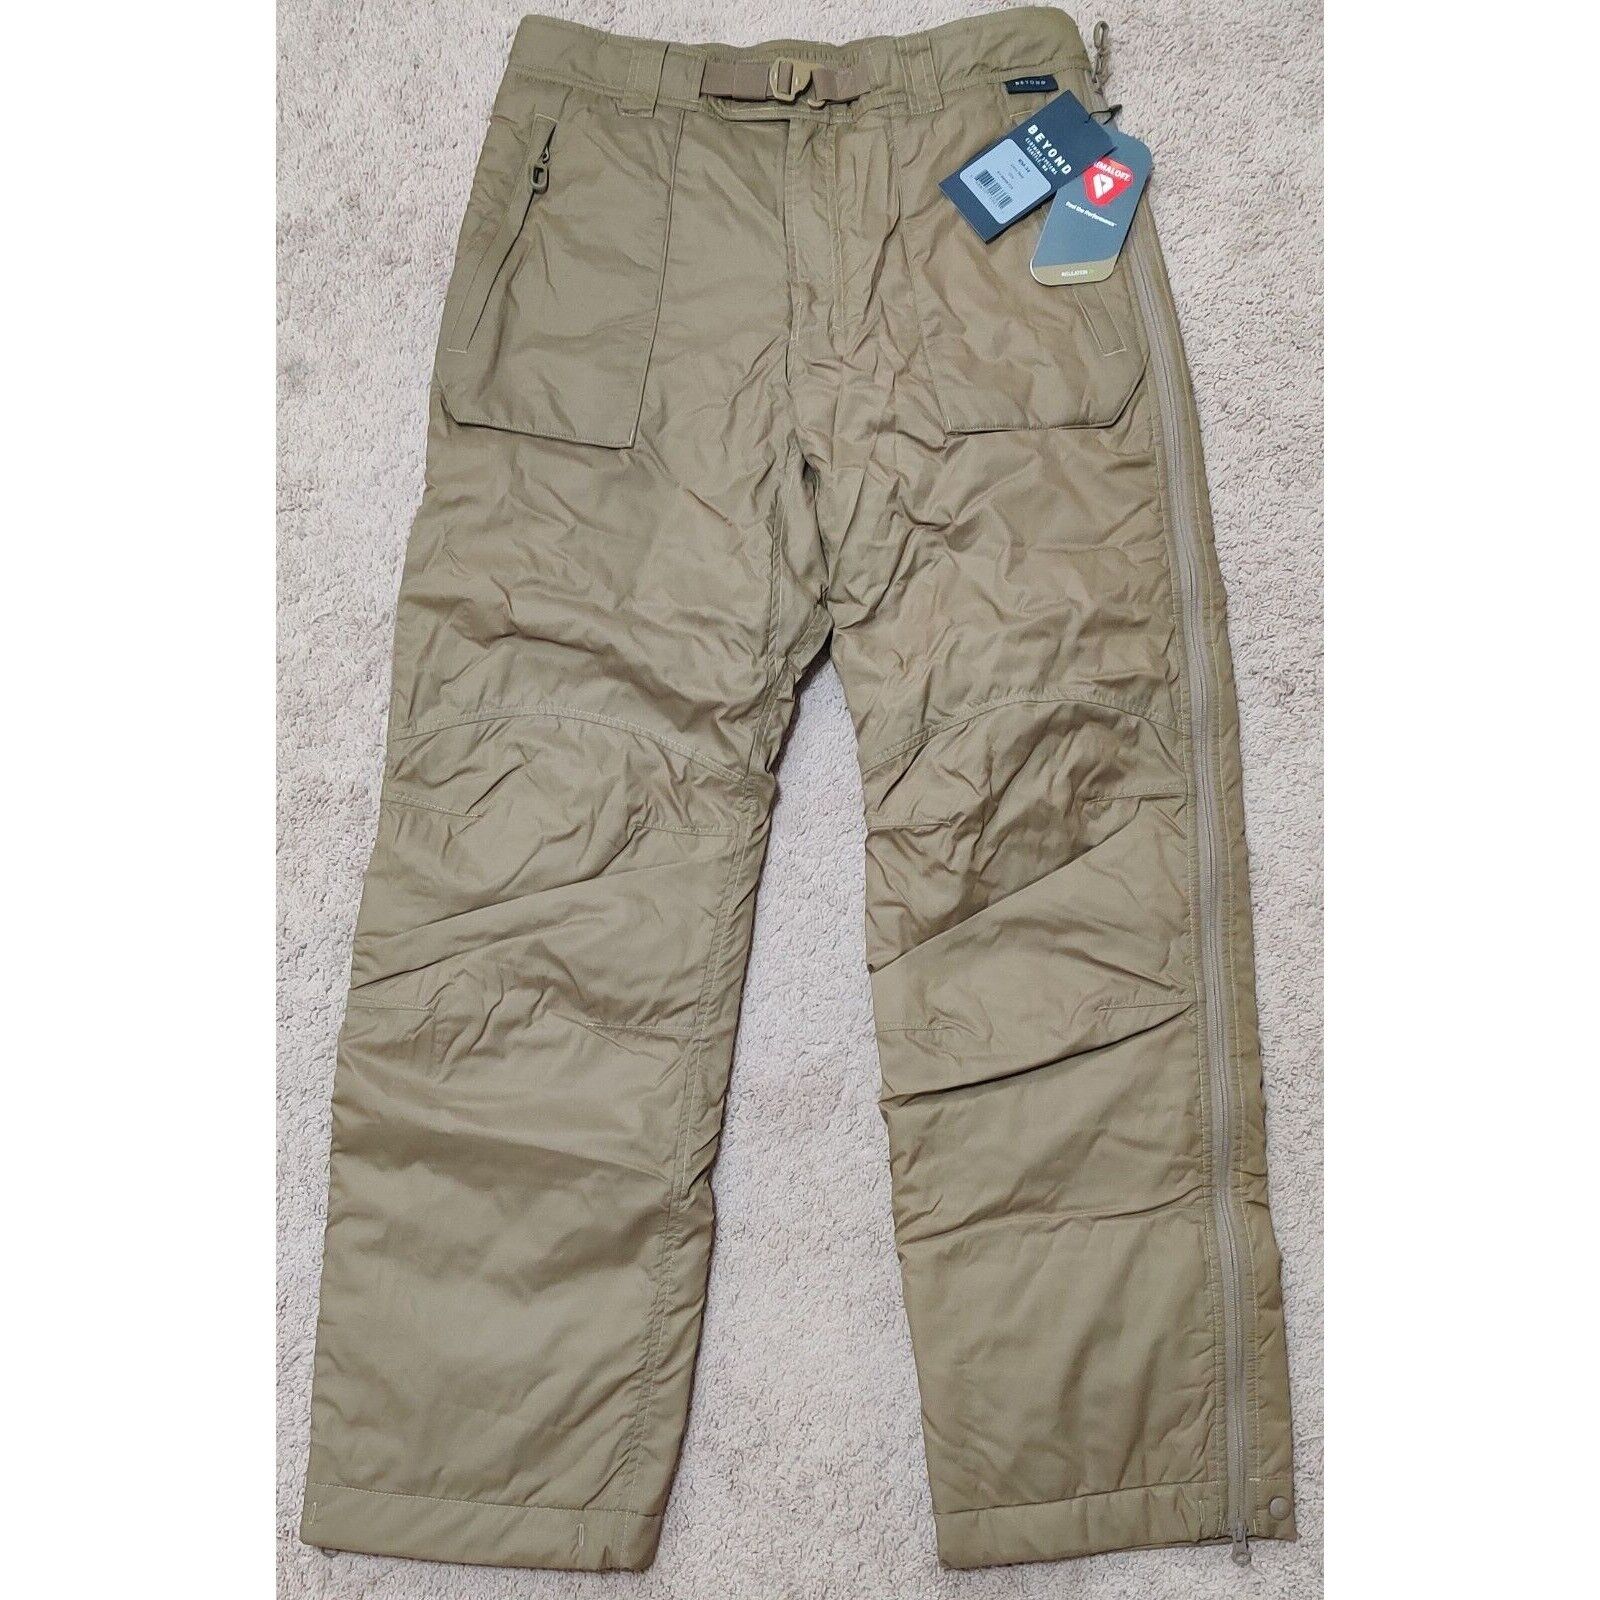 New Beyond Clothing PCU PL5 Pant Coyote Brown Size: Large REGULAR